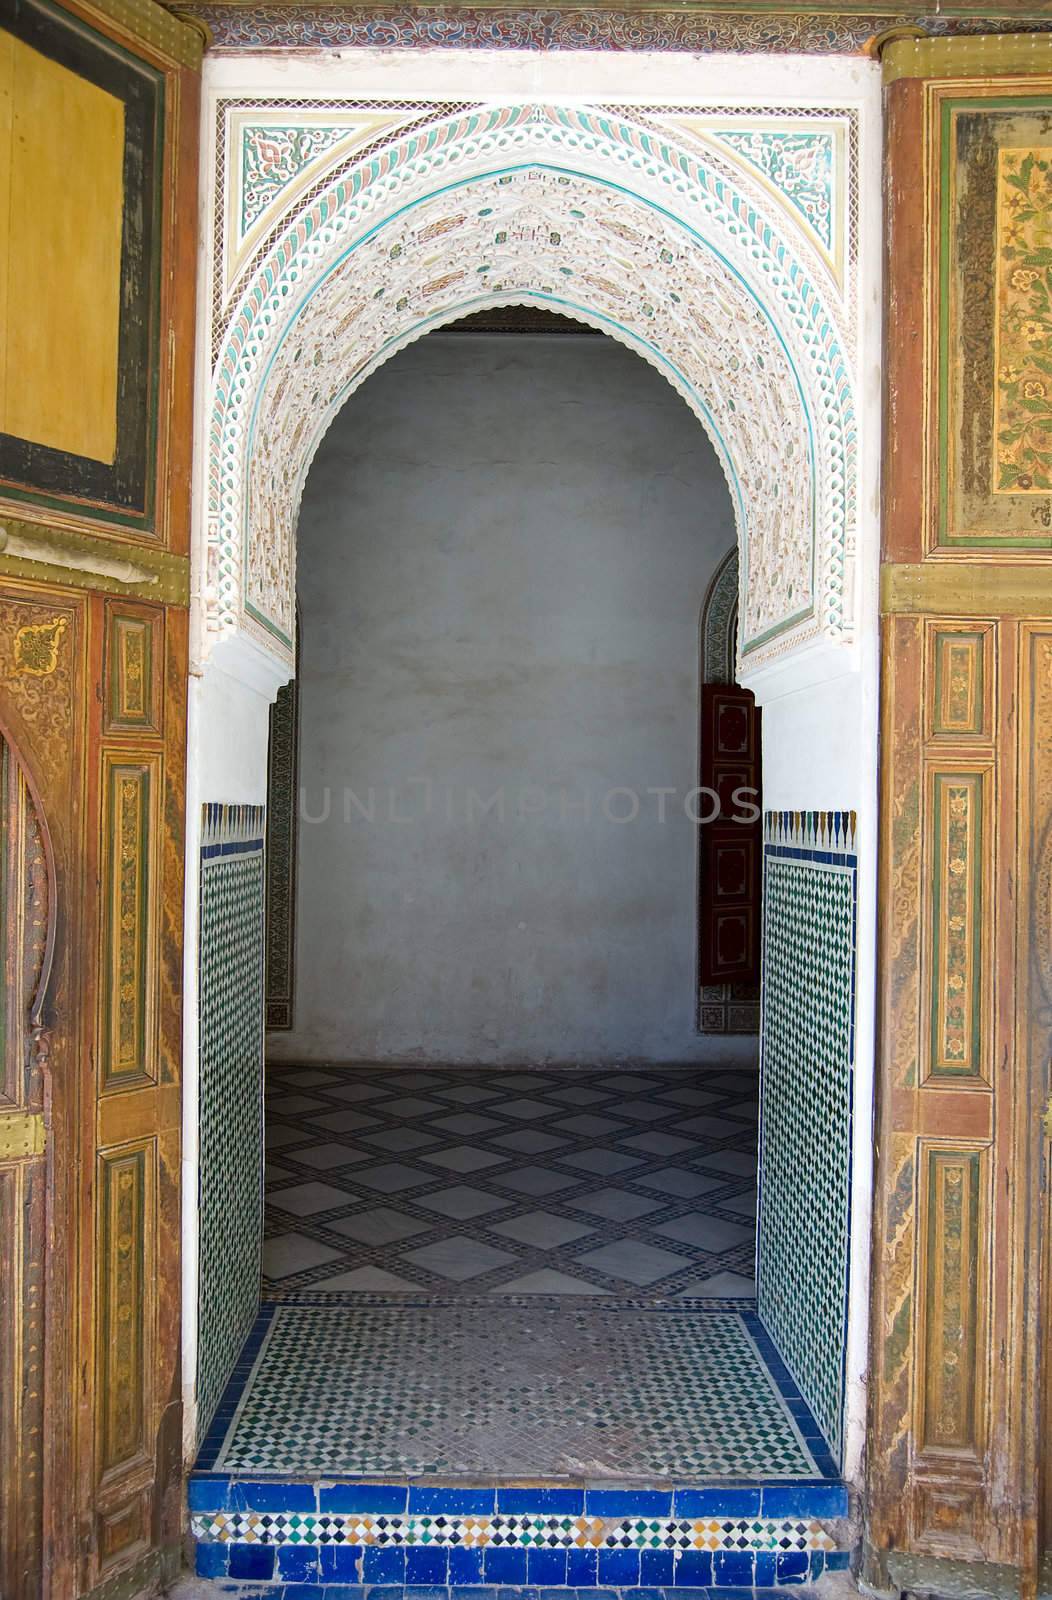 A door of the Bahia Palace in Marrakesh